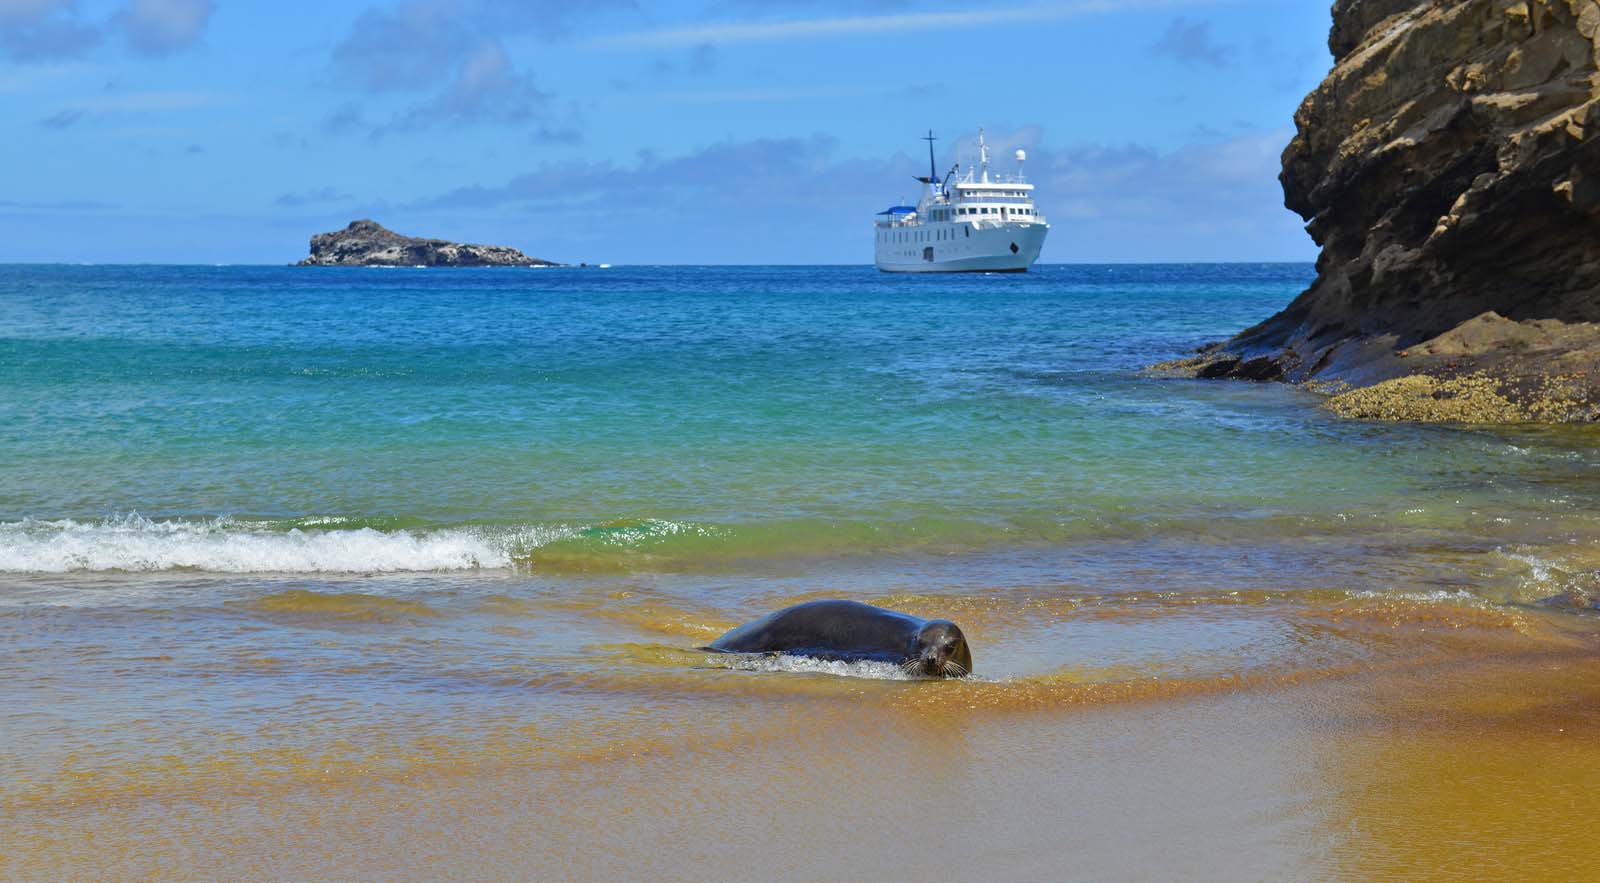  Galapagos | Galapagos Family Cruise Charter Guide: Charting the Perfect Voyage